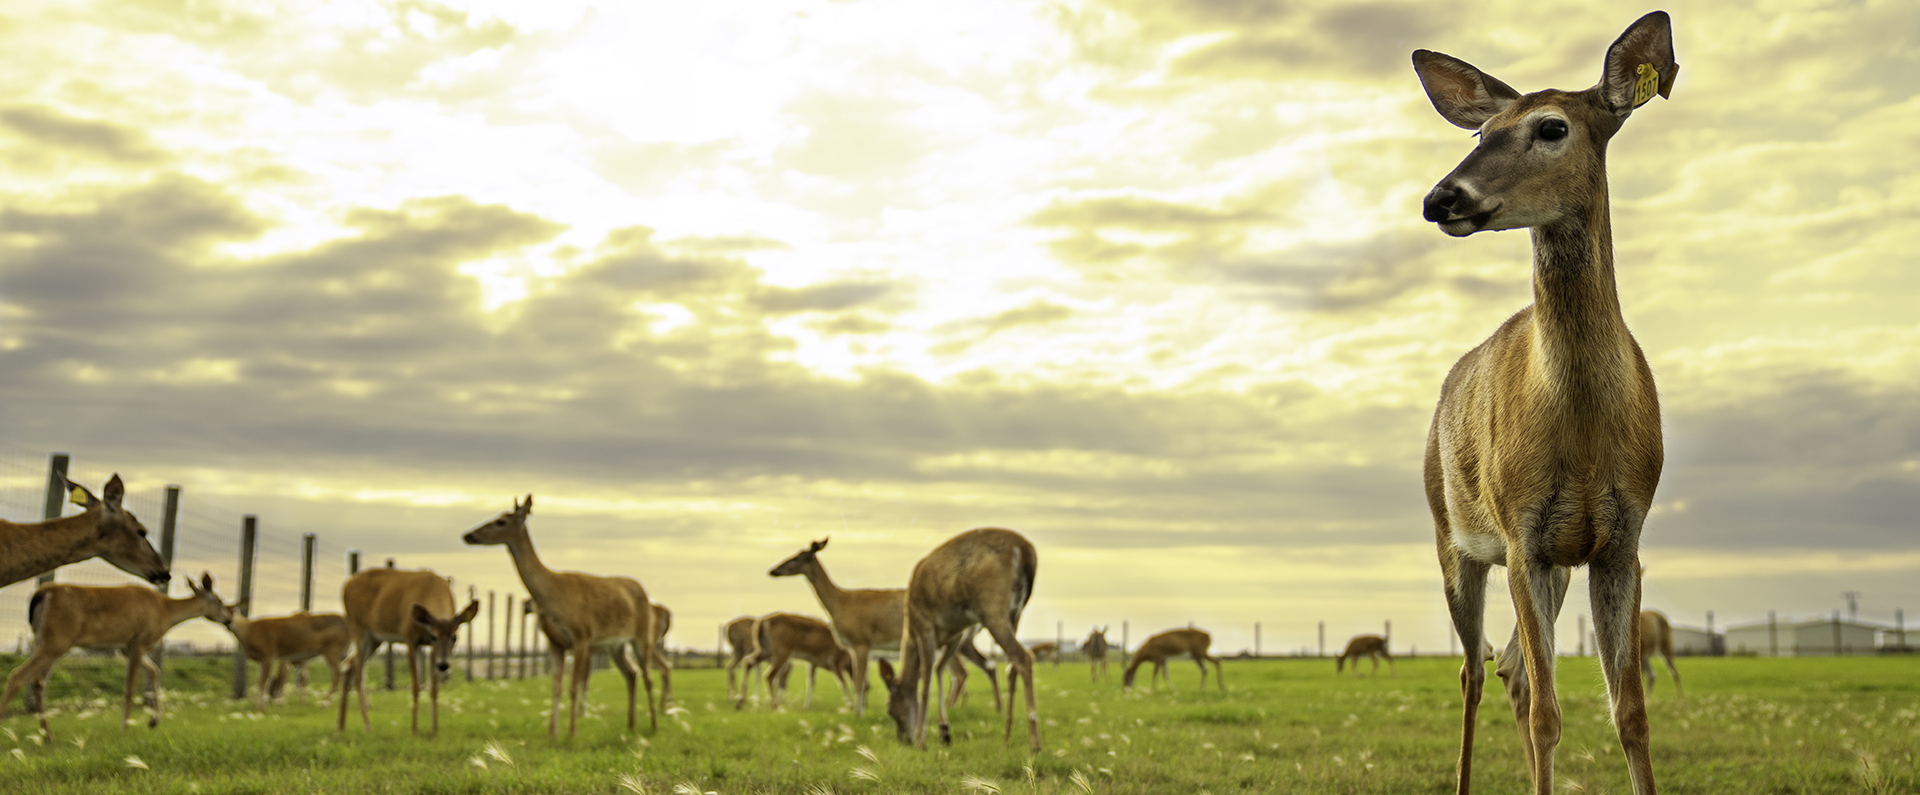 Nine deer in a field at sunset